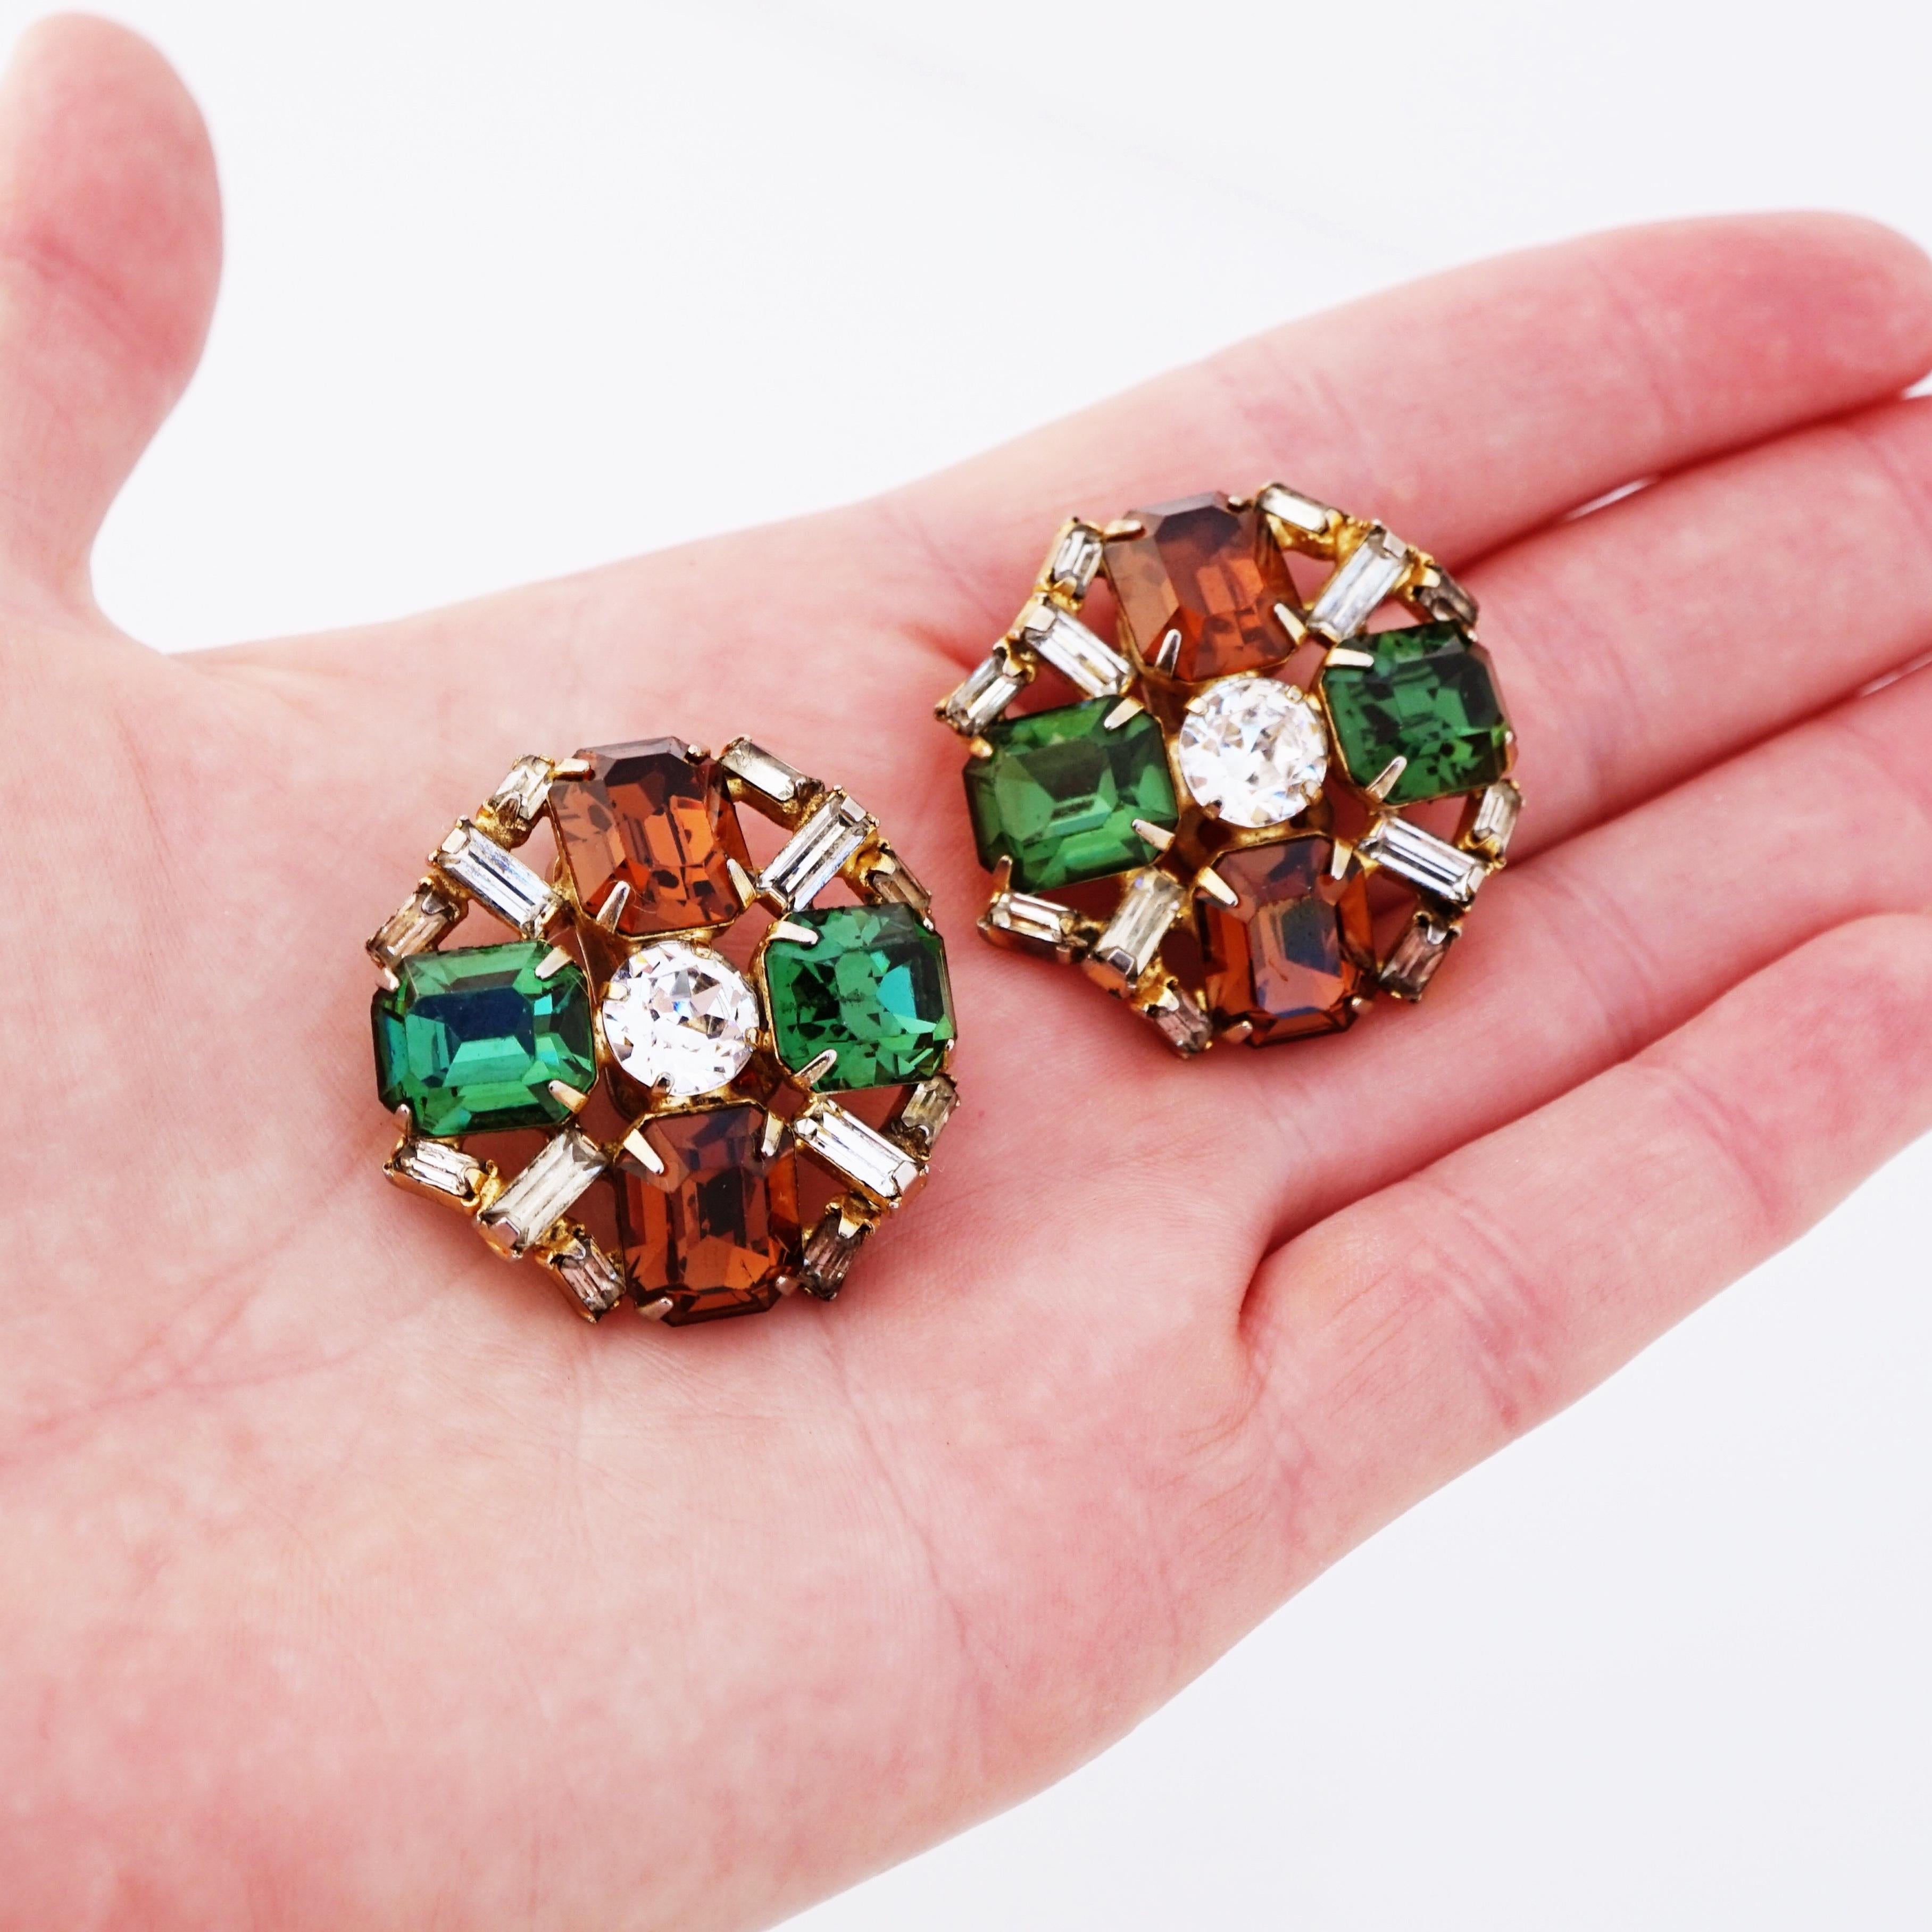 Smoked Topaz and Emerald Rhinestone Crystal Statement Earrings By Hobé, 1960s For Sale 2